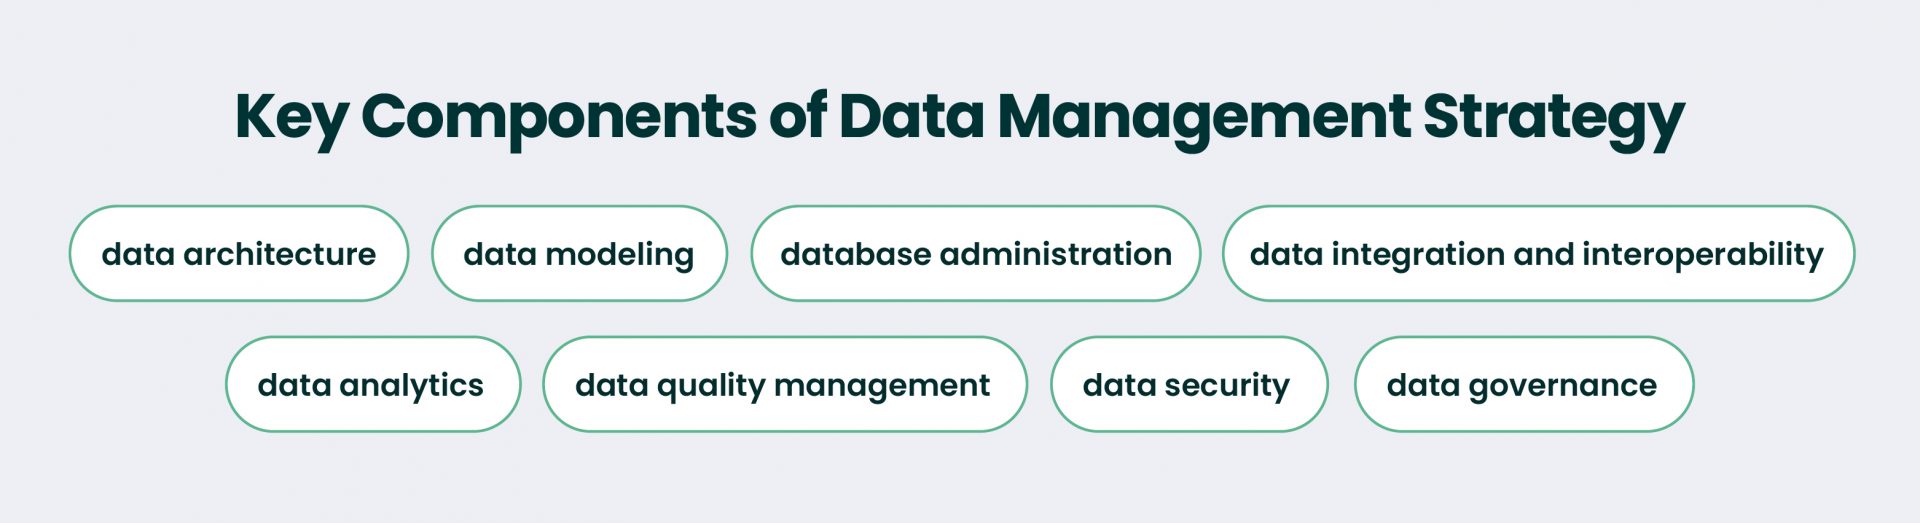 Key components of data management strategy